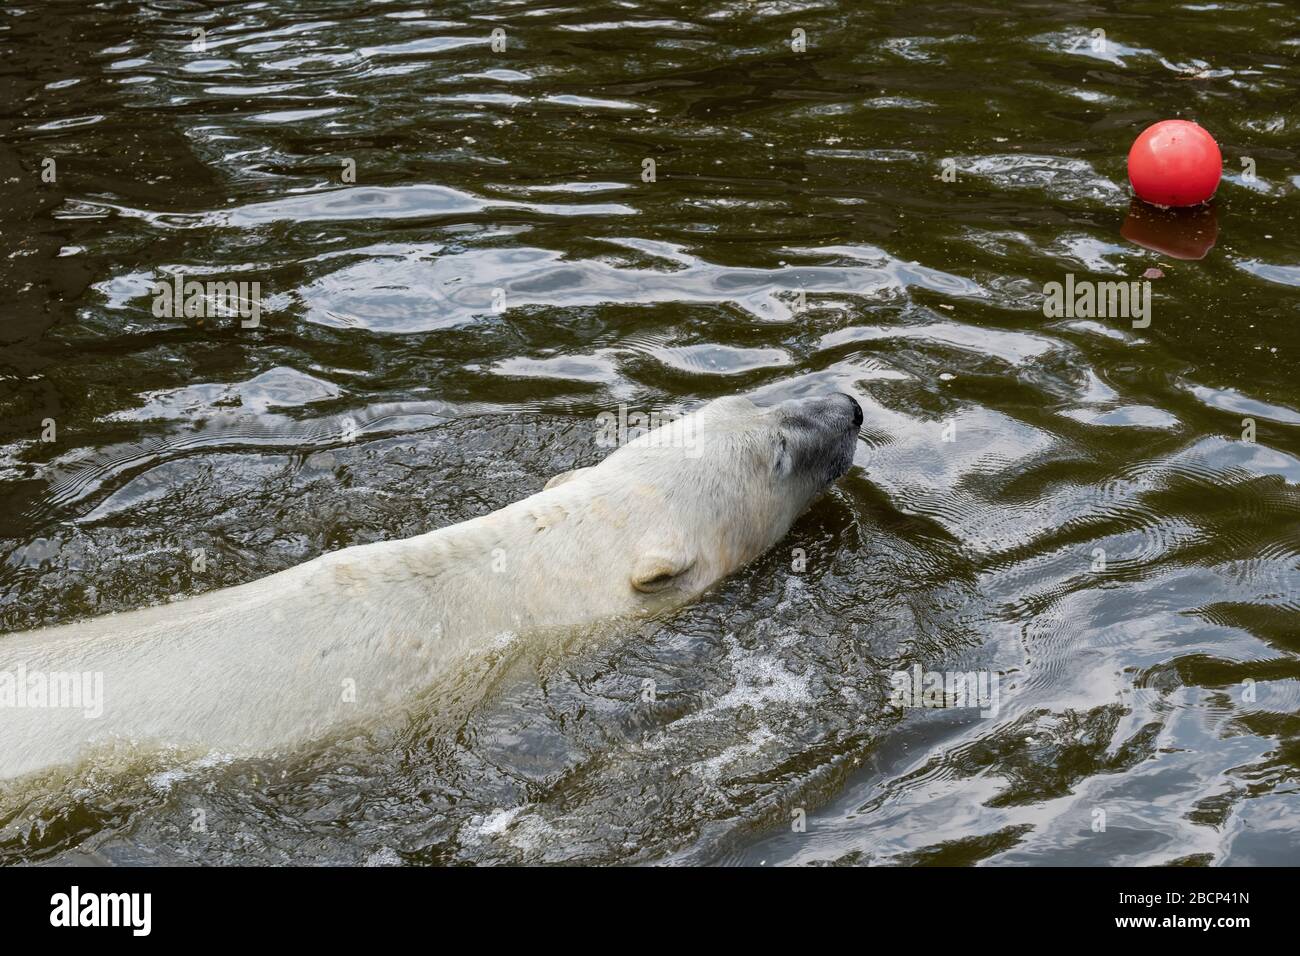 Polar bear (Ursus maritimus) swimming to get a red ball in Warsaw Zoological Garden in Warsaw, Poland Stock Photo